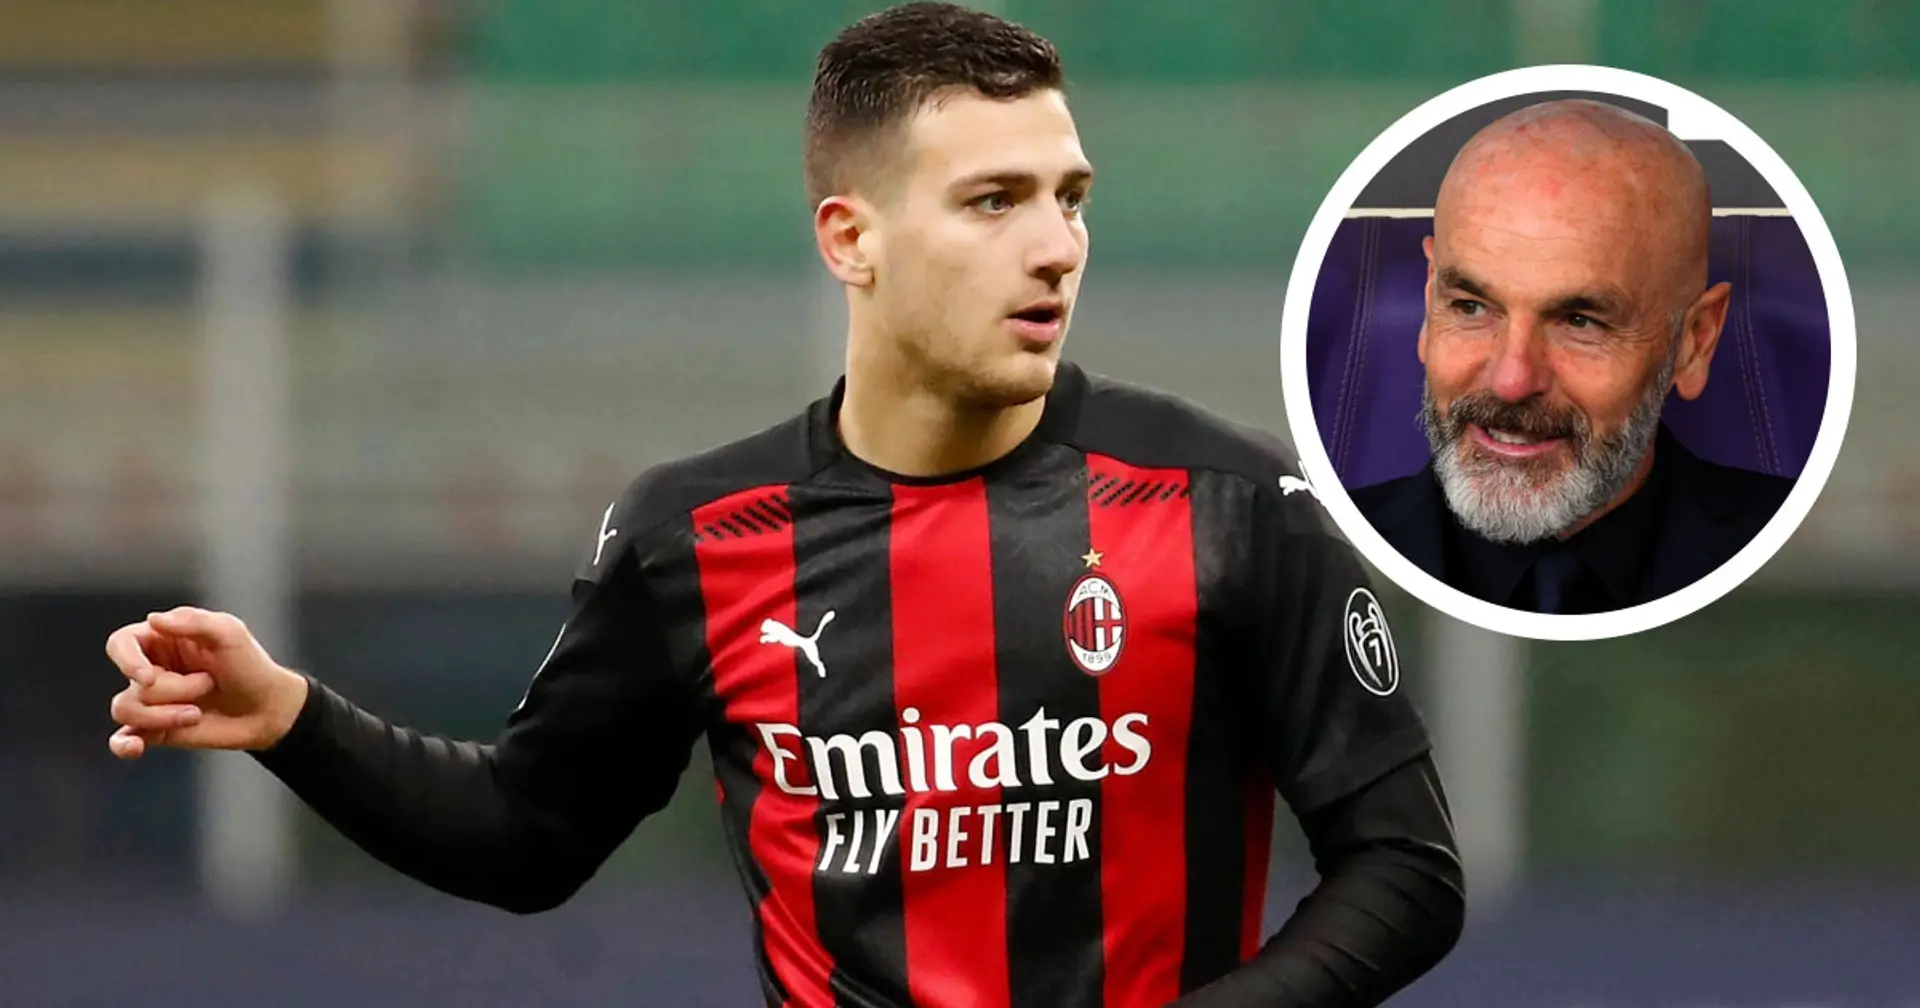 'He's a winner because he trains at 105% instead of whining': AC Milan boss Pioli praises Dalot's attitude